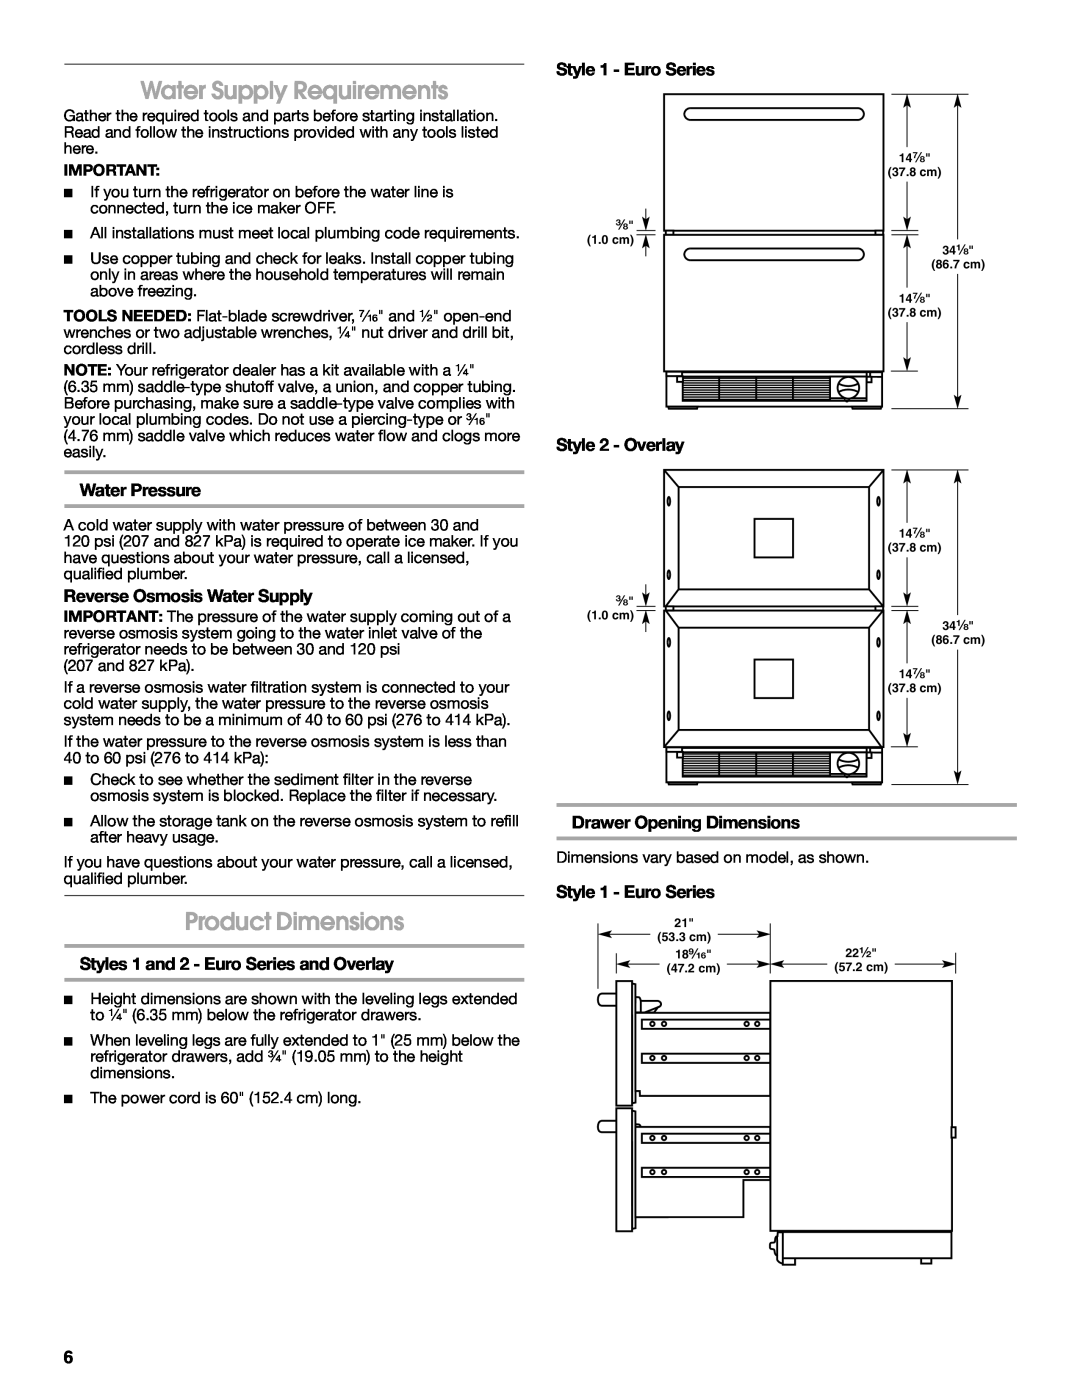 Jenn-Air W10310149A manual Water Supply Requirements, Product Dimensions, Water Pressure, Reverse Osmosis Water Supply 